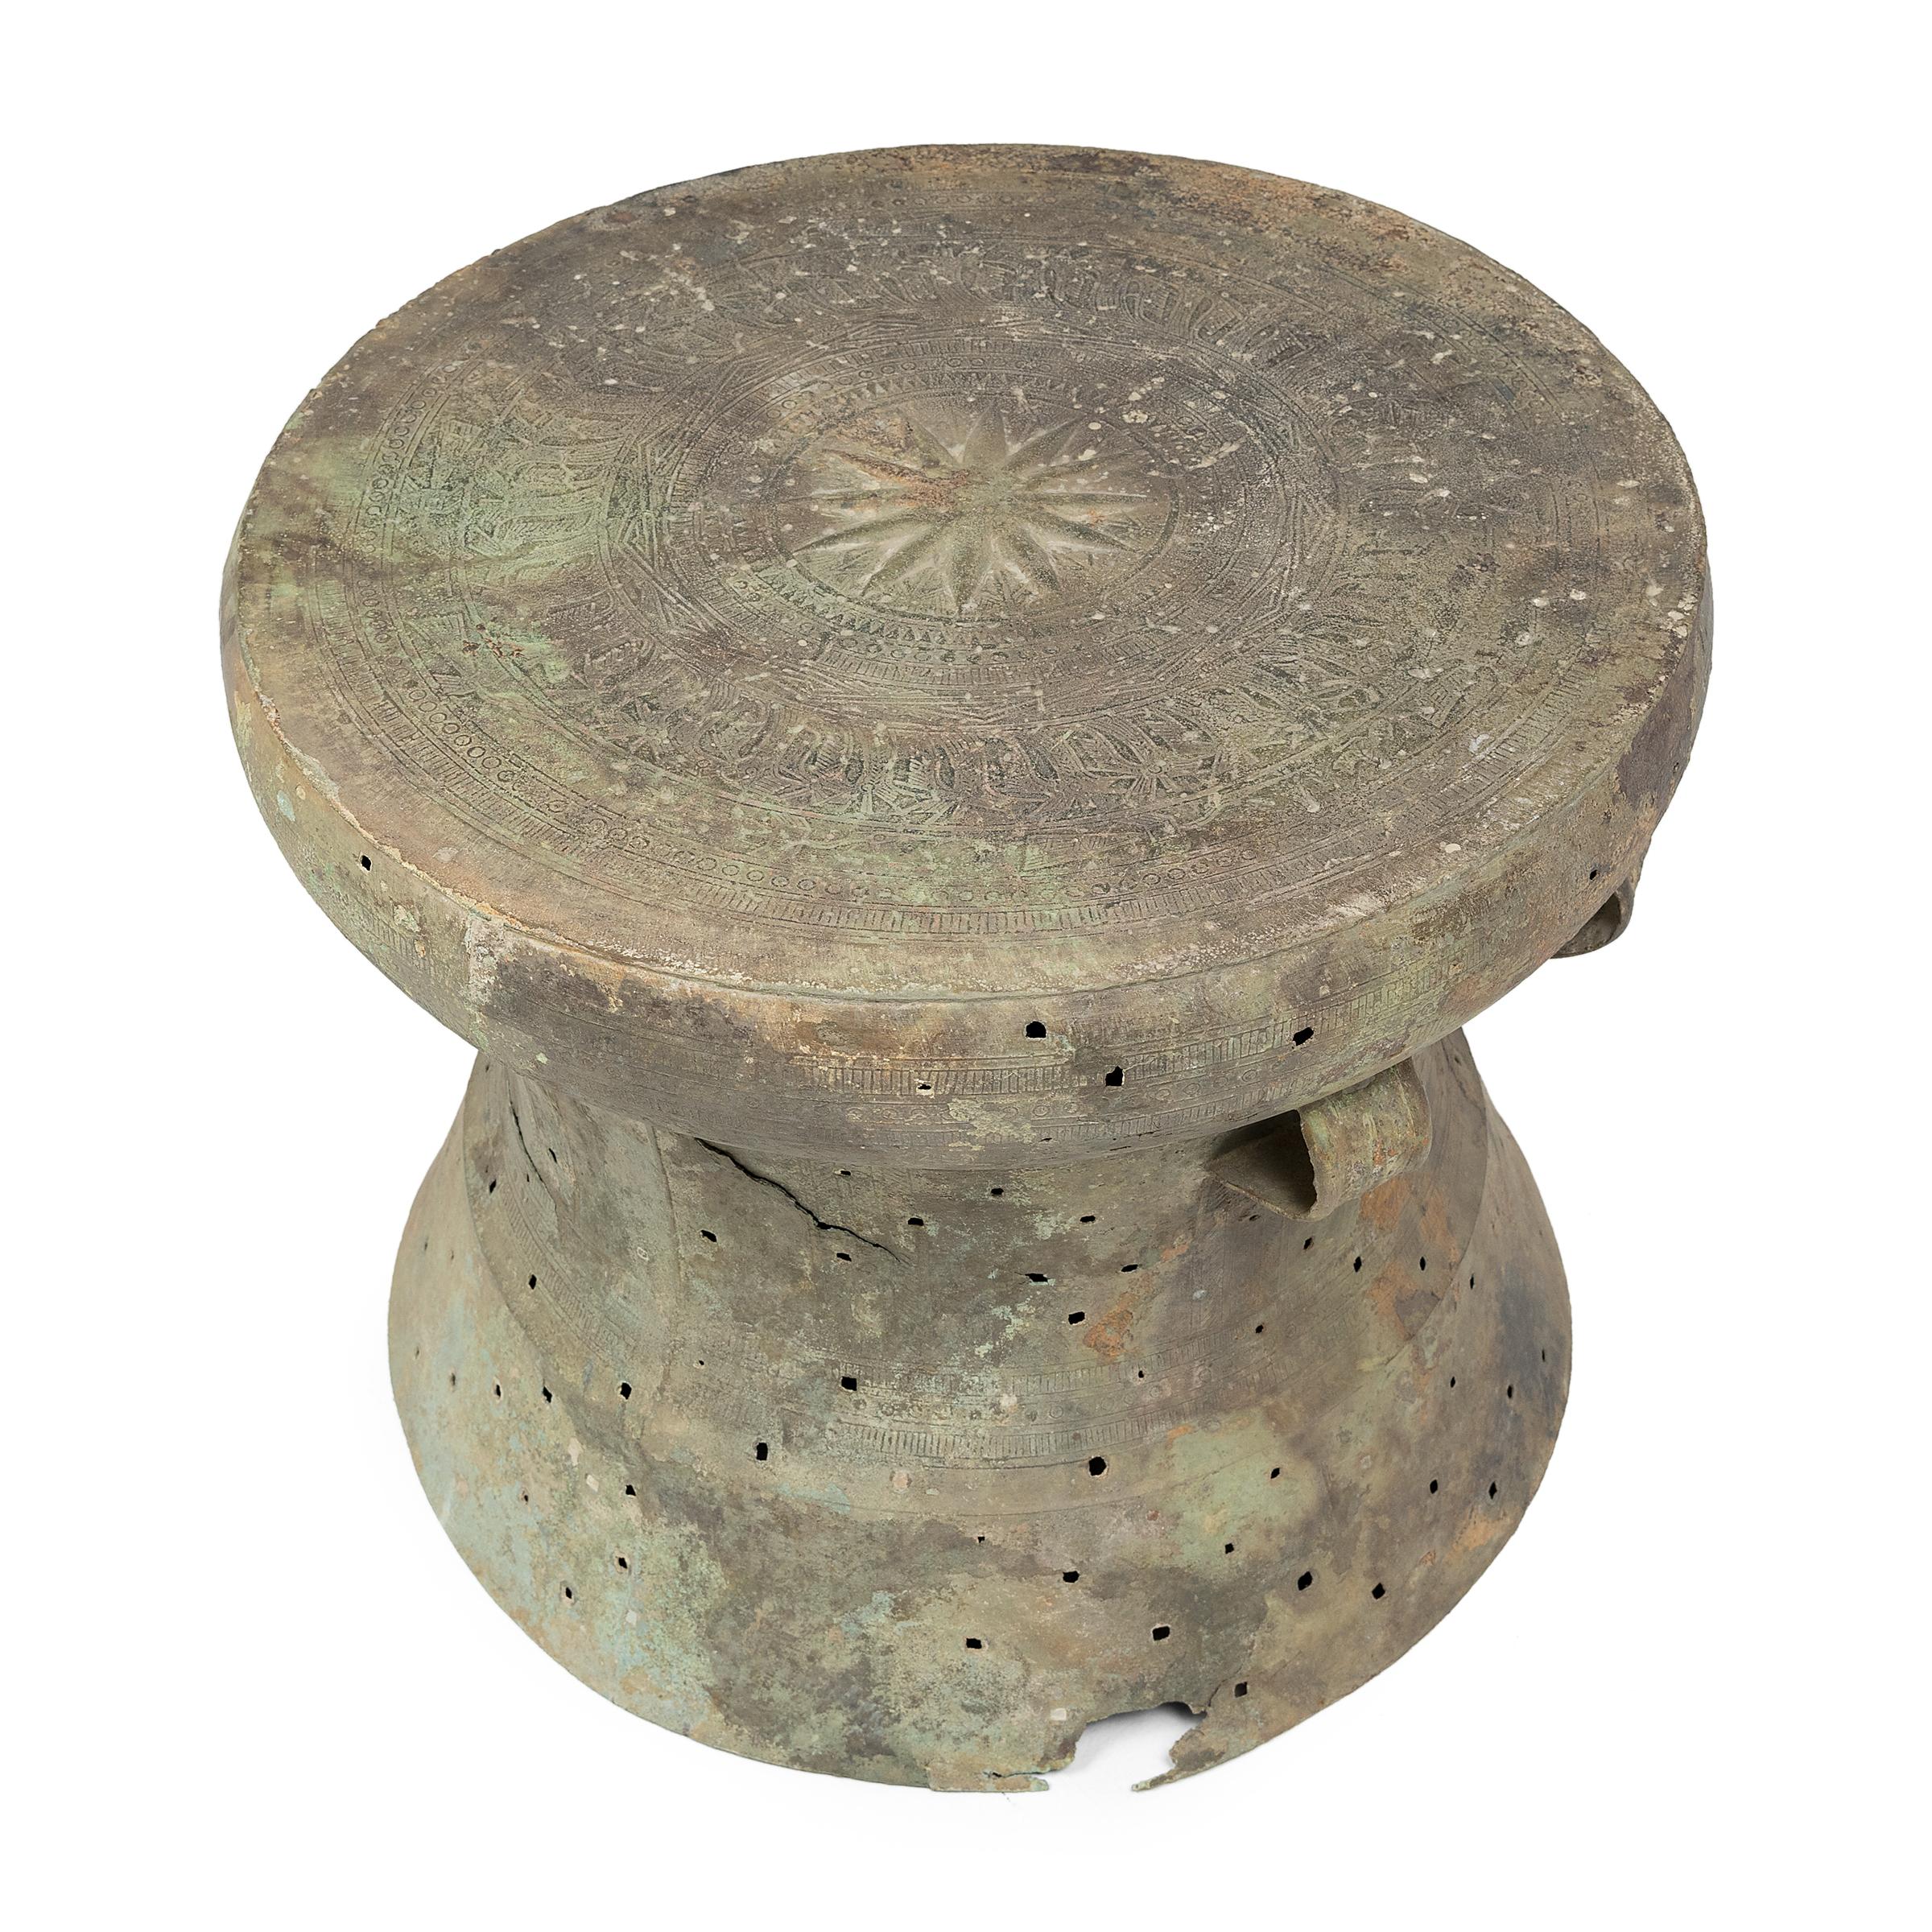 The bronze Dong Son drum is an iconic form that dates back to as early as 600 BCE. Found throughout southeast Asia, the earliest drums are attributed to the Dong Son culture of northern Vietnam and spread to nearby regions by means of trade and